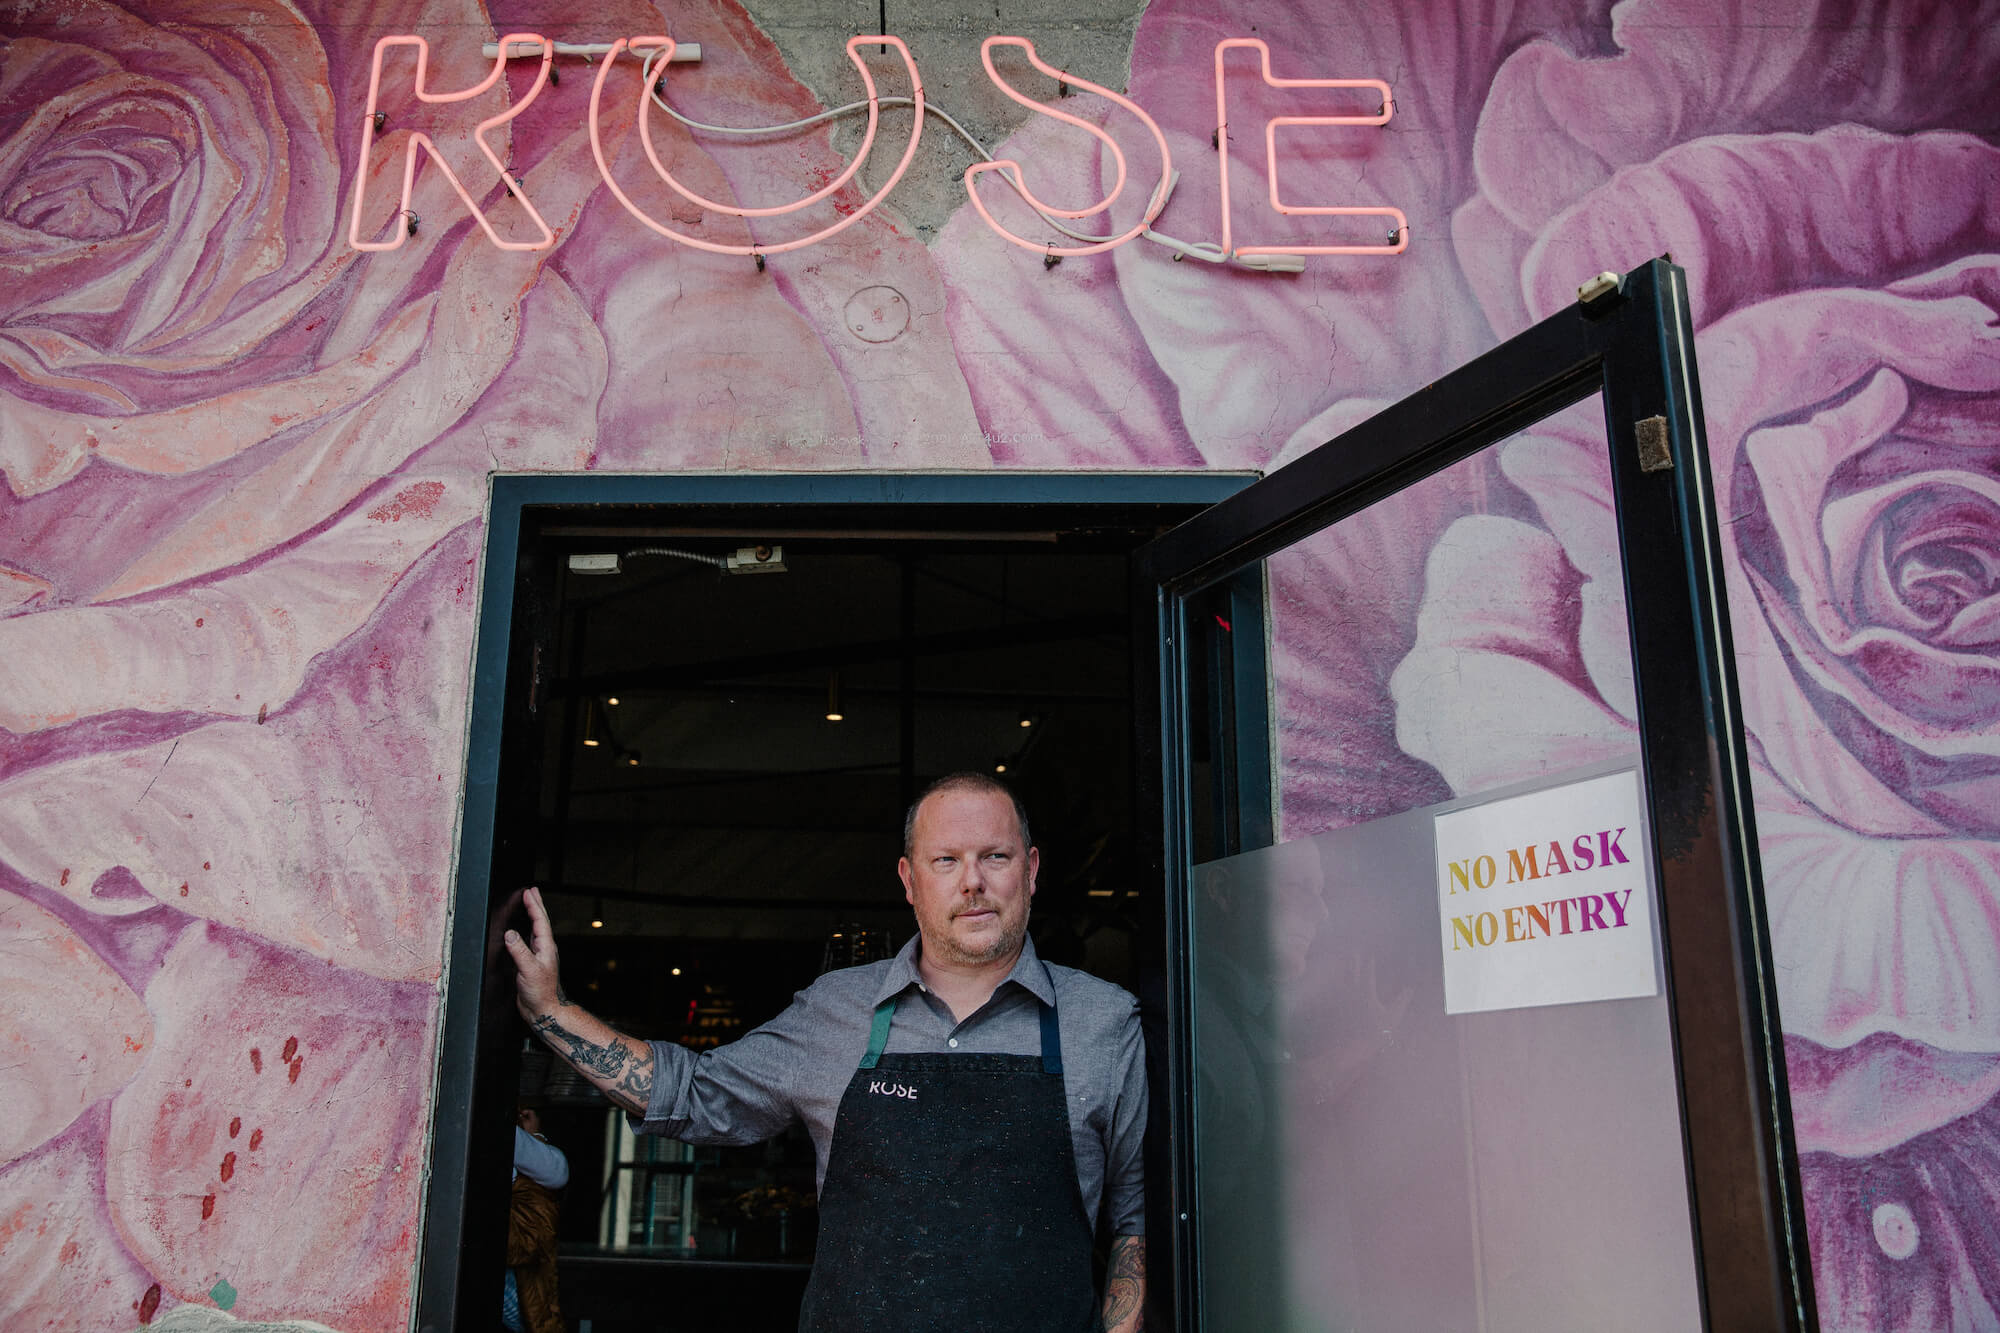 Jason Neroni, chef and managing partner at the Rose, emerged from the pandemic only to worry that customers wouldn't feel safe enough to return to his restaurant. December 2021